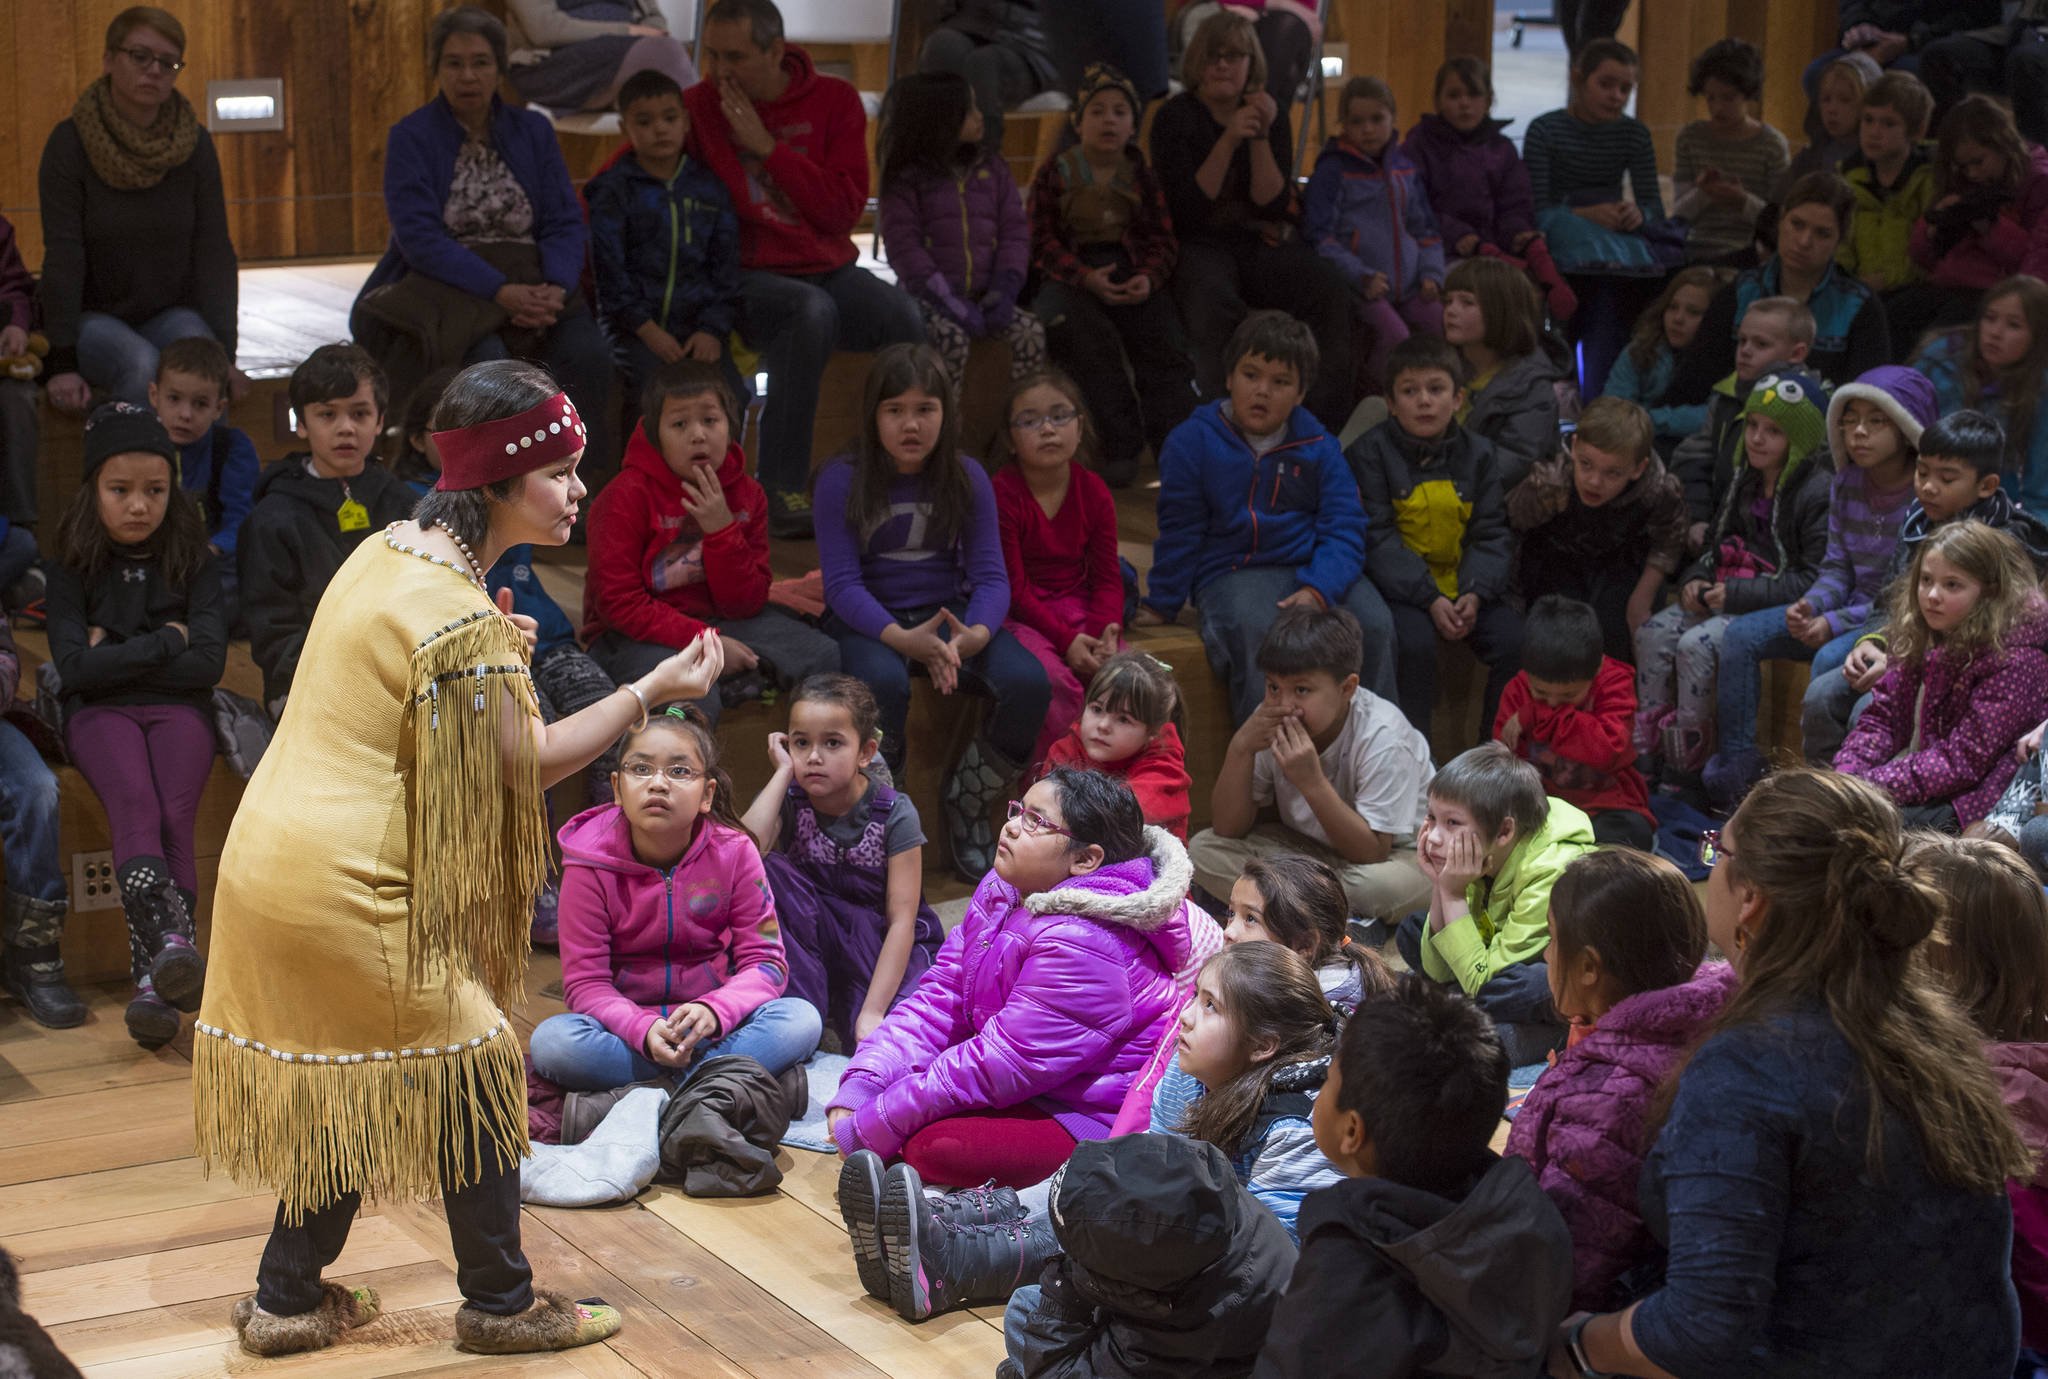 Lily Hope tells a story about respecting nature to second-grade students from Harborview Elementary and Juneau Charter Community Schools at the Walter Soboleff Center on Thursday, Nov. 16, 2017. The Storytelling Excursion for all Juneau School District second graders is part of the Any Given Child programming sponsored by the Juneau School District, Mayor’s office, University of Alaska Southeast, Sealaska Heritage Institute and the Juneau Arts and Humanities Council. (Michael Penn | Juneau Empire)